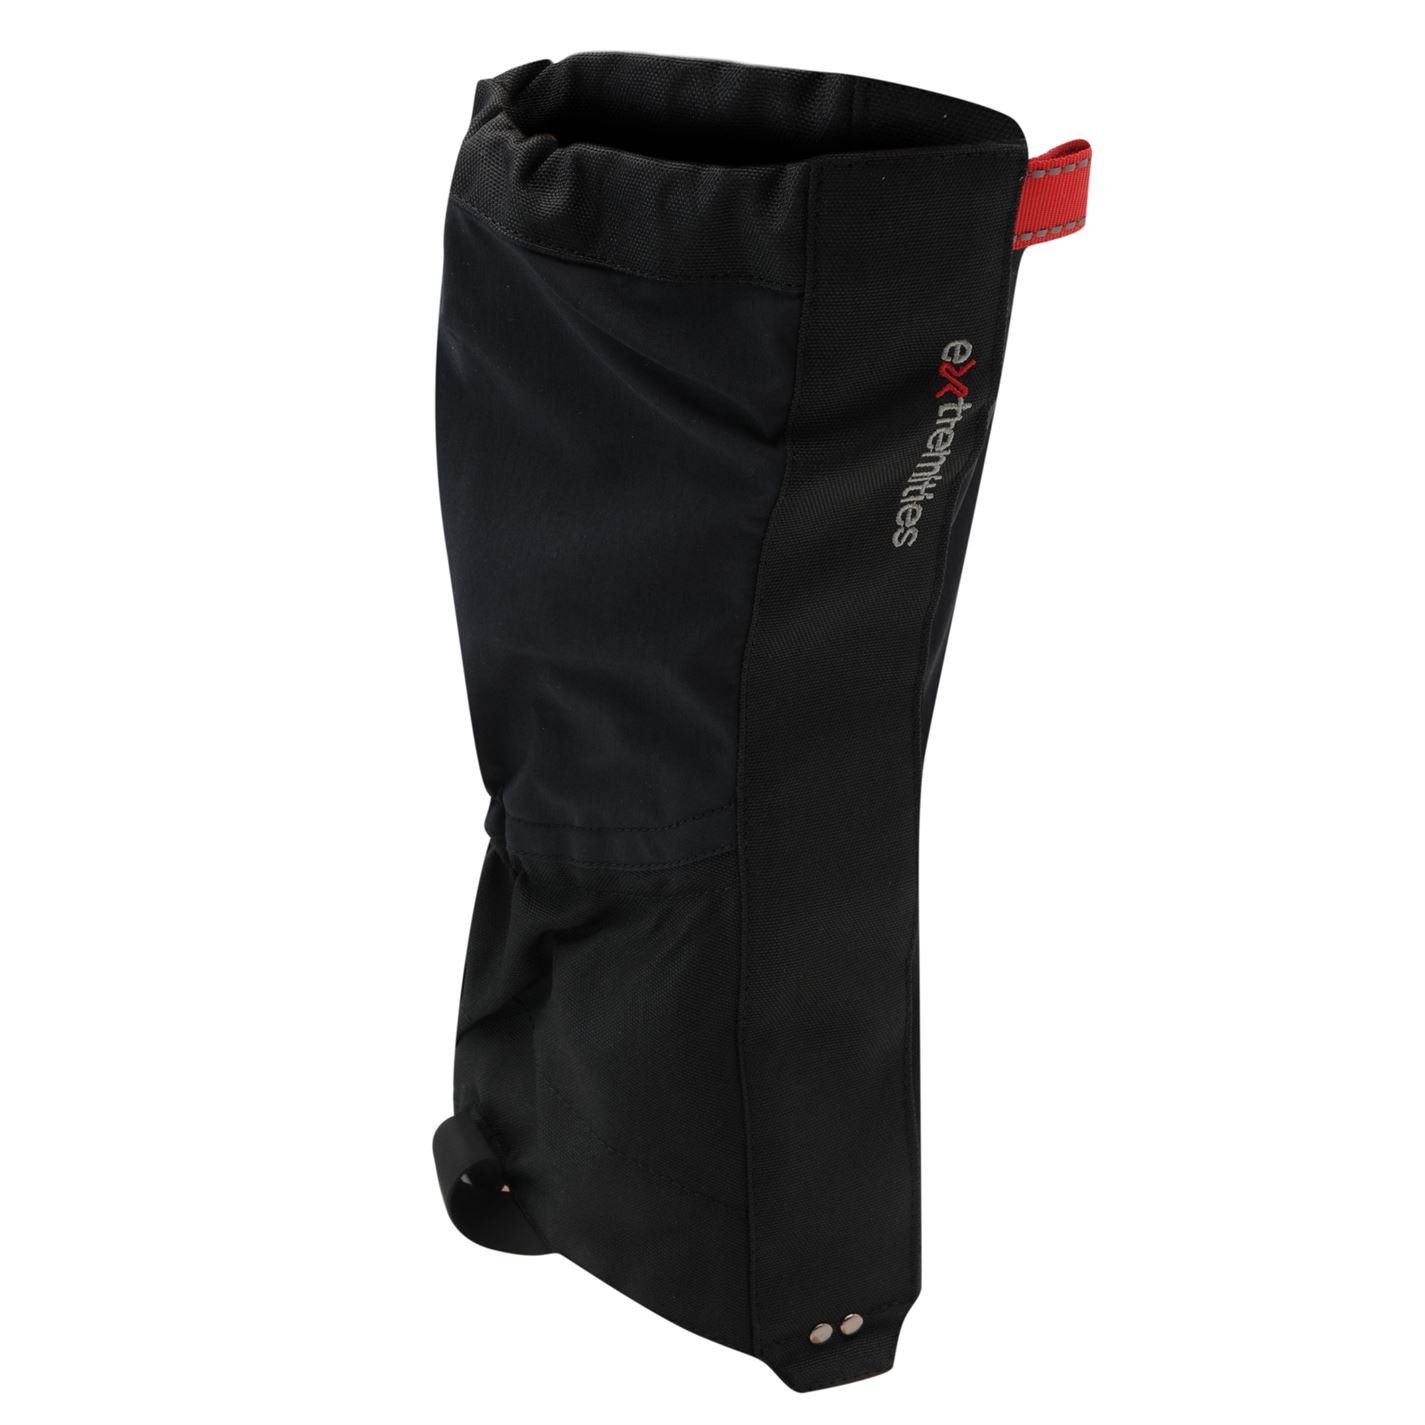 Extremities Tay Ankle Gaiter GTX